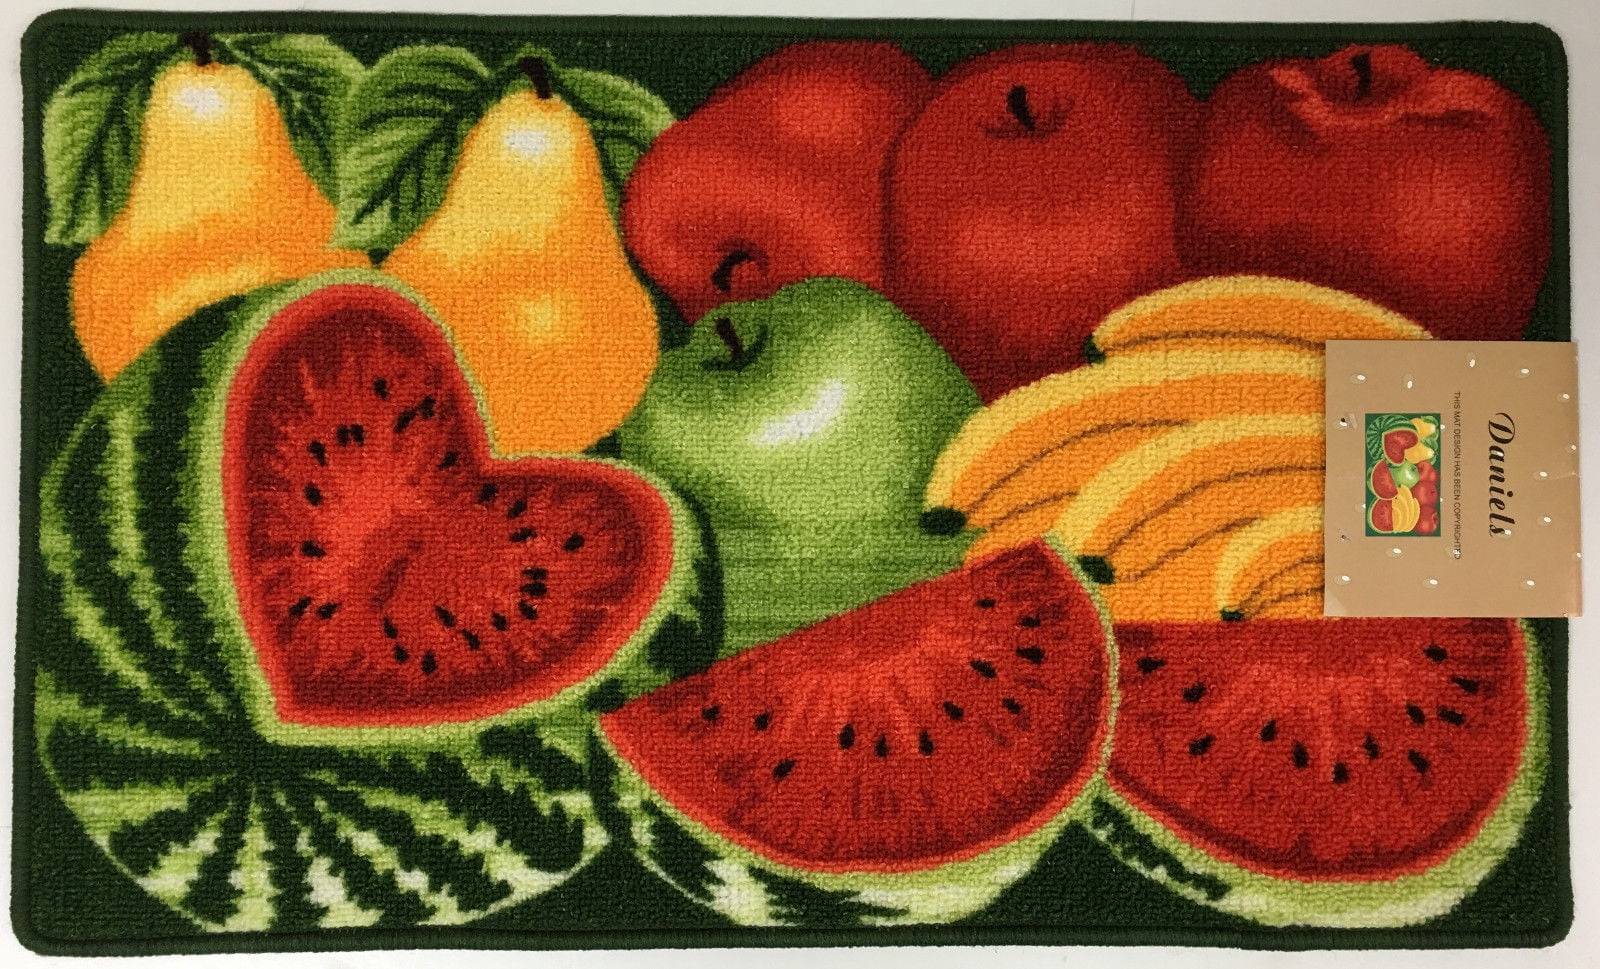 lighter nonskid latex back PRINTED KITCHEN RUG 18" x 30" 6 FRUITS by Daniel 